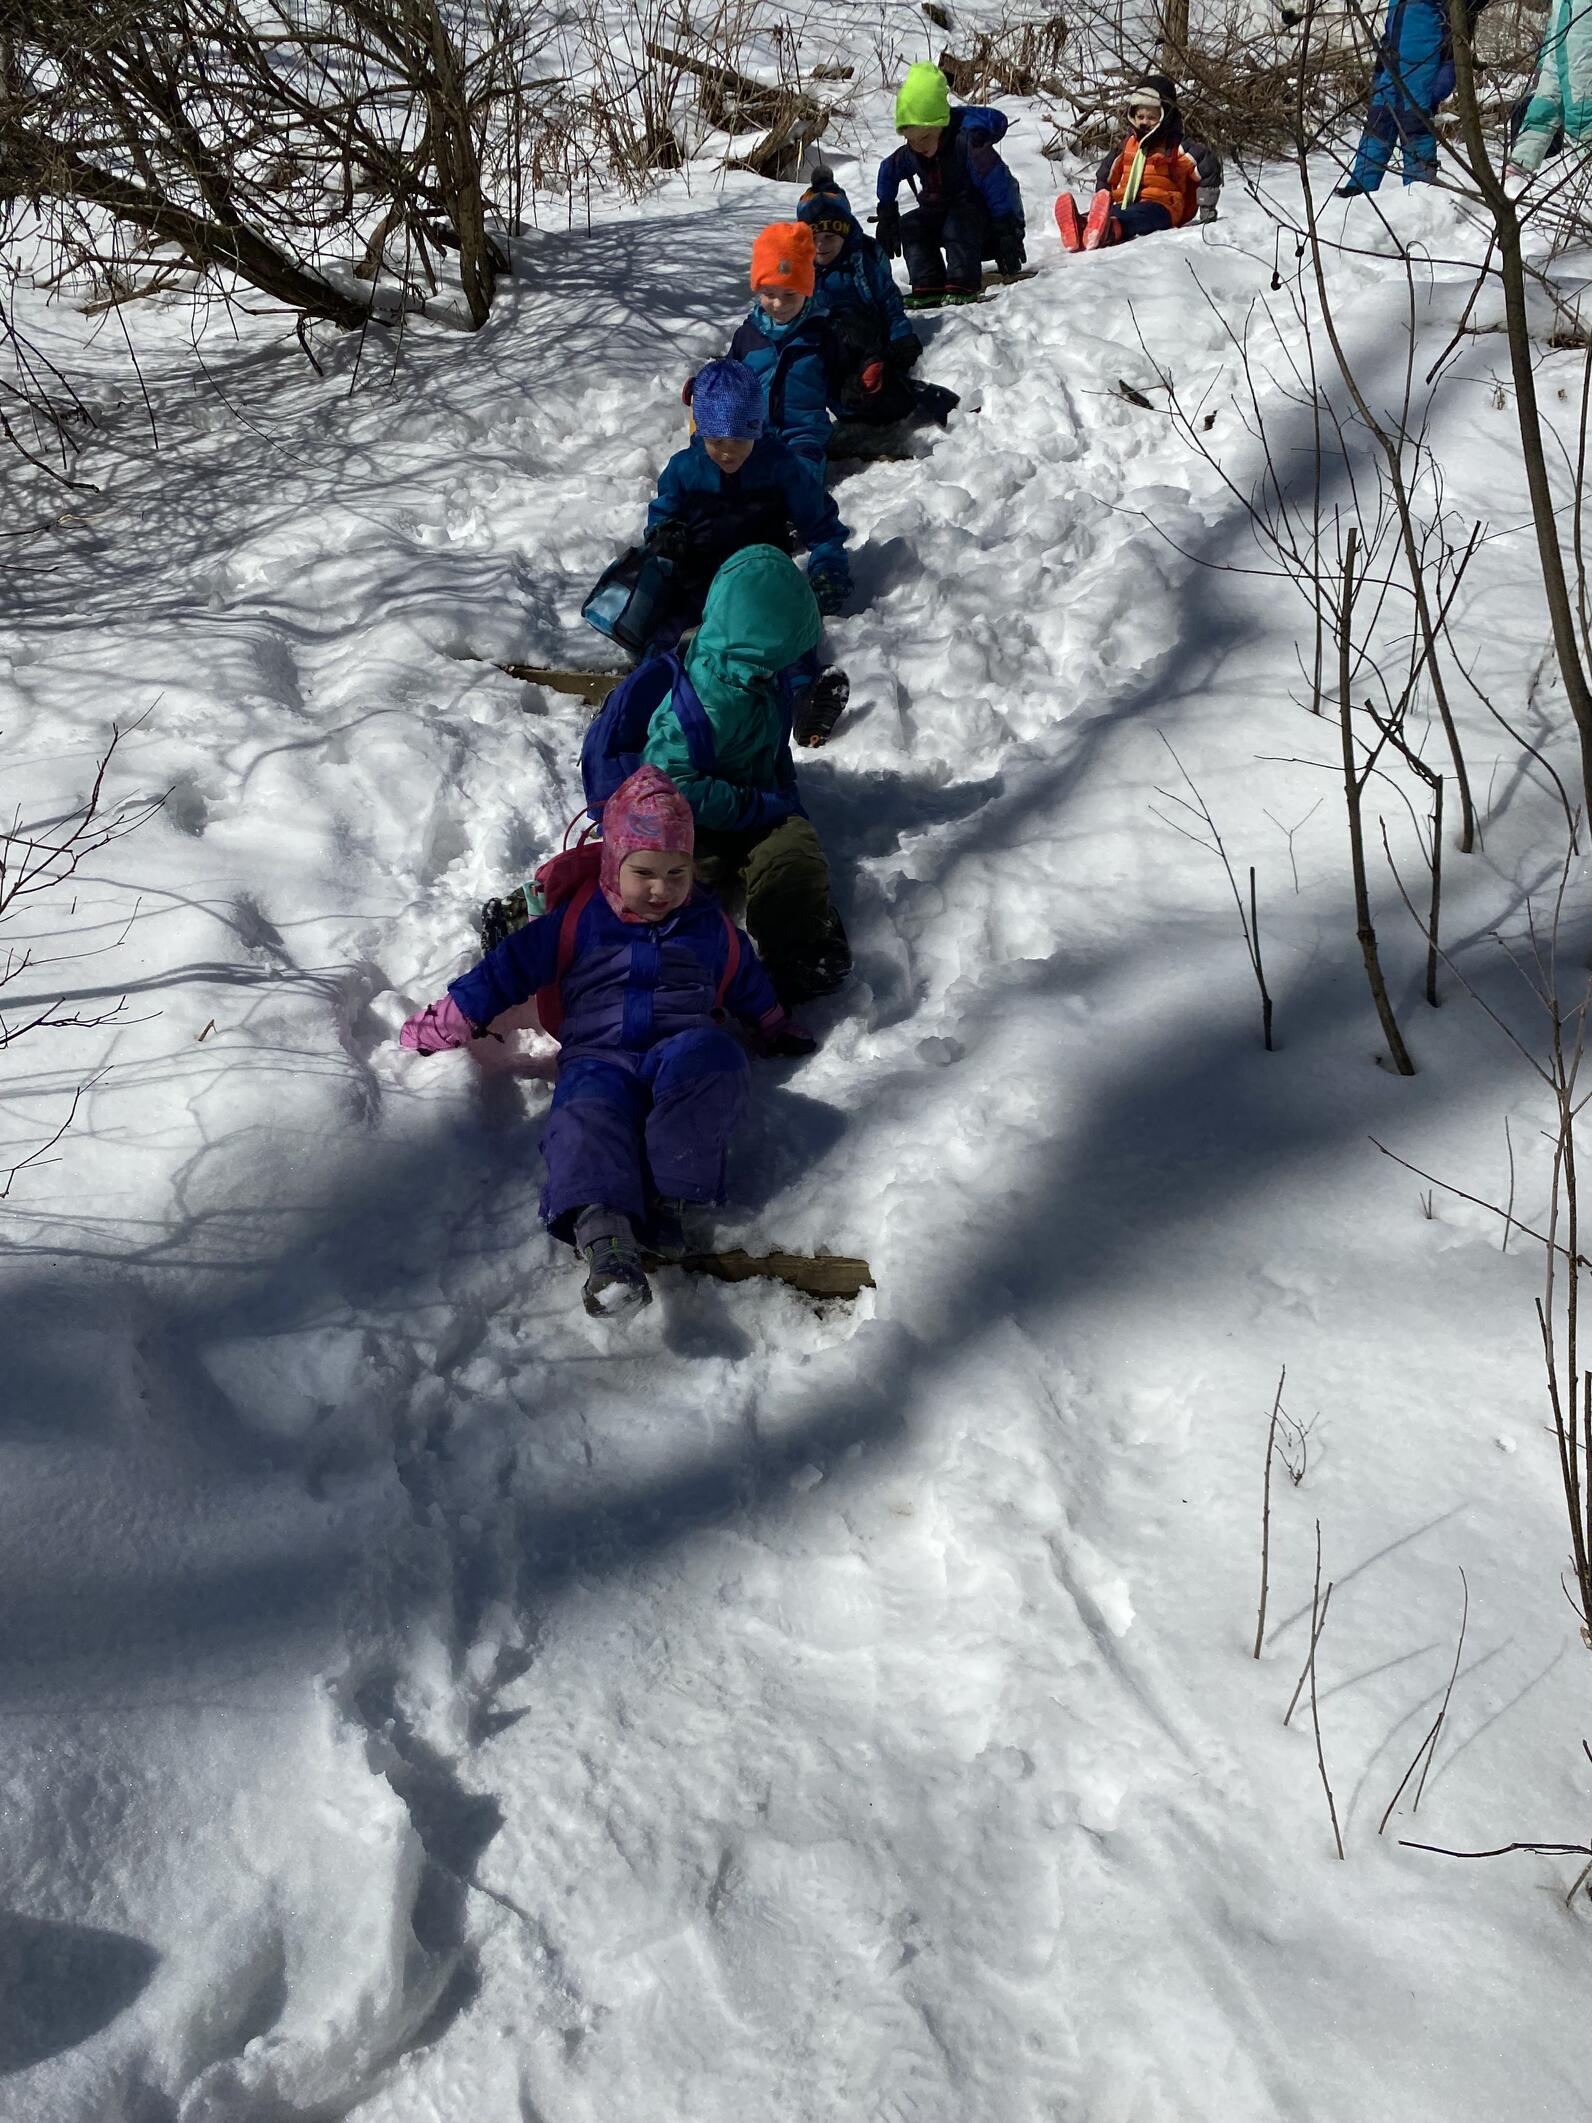 children slid down a snowy hill in a line